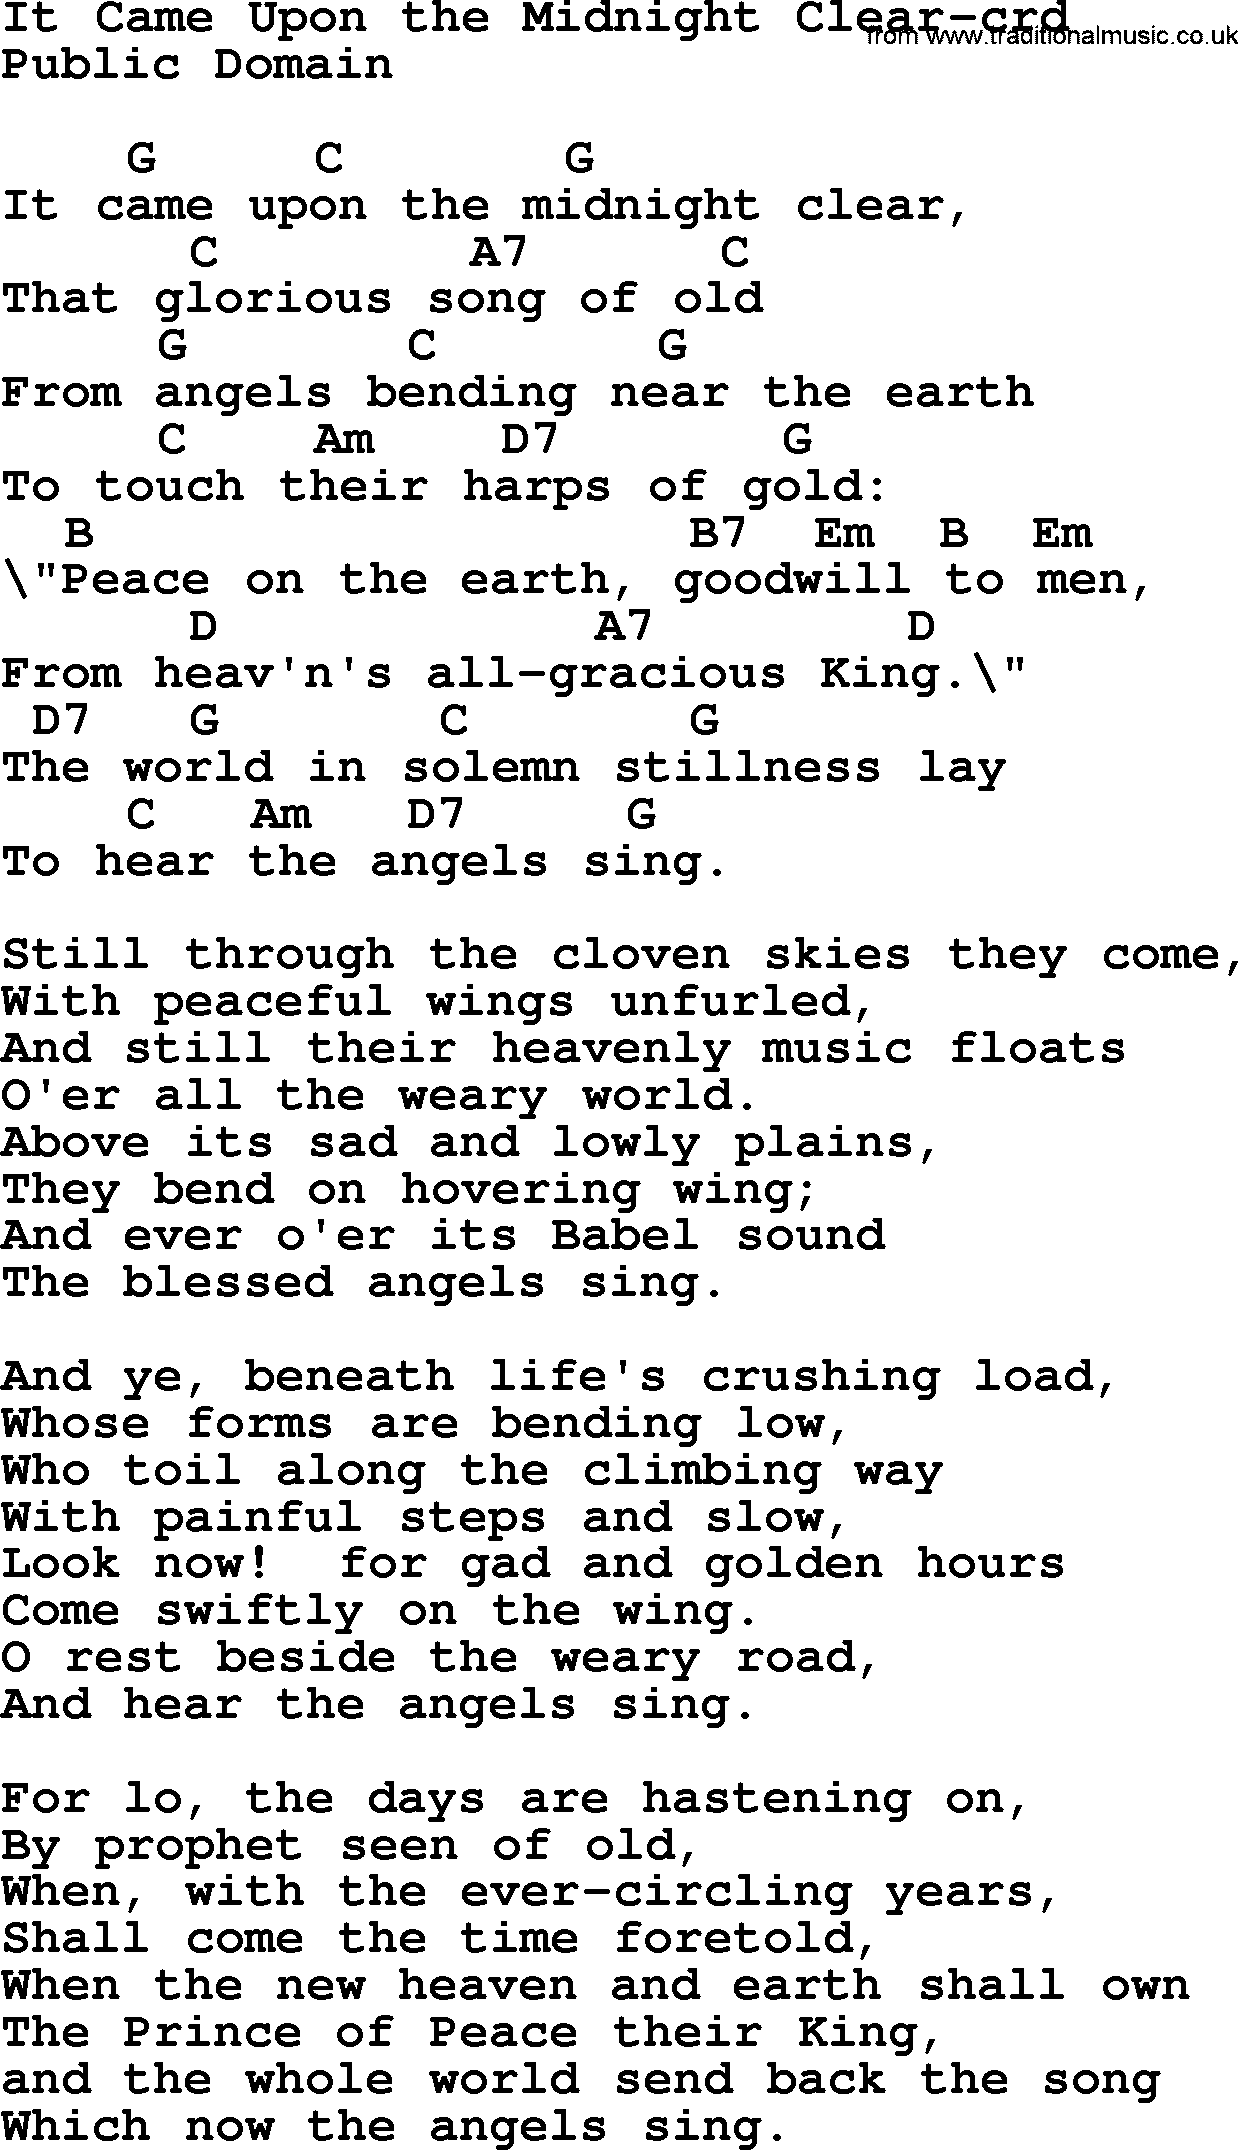 Top 500 Hymn: It Came Upon The Midnight Clear - lyrics, chords and PDF